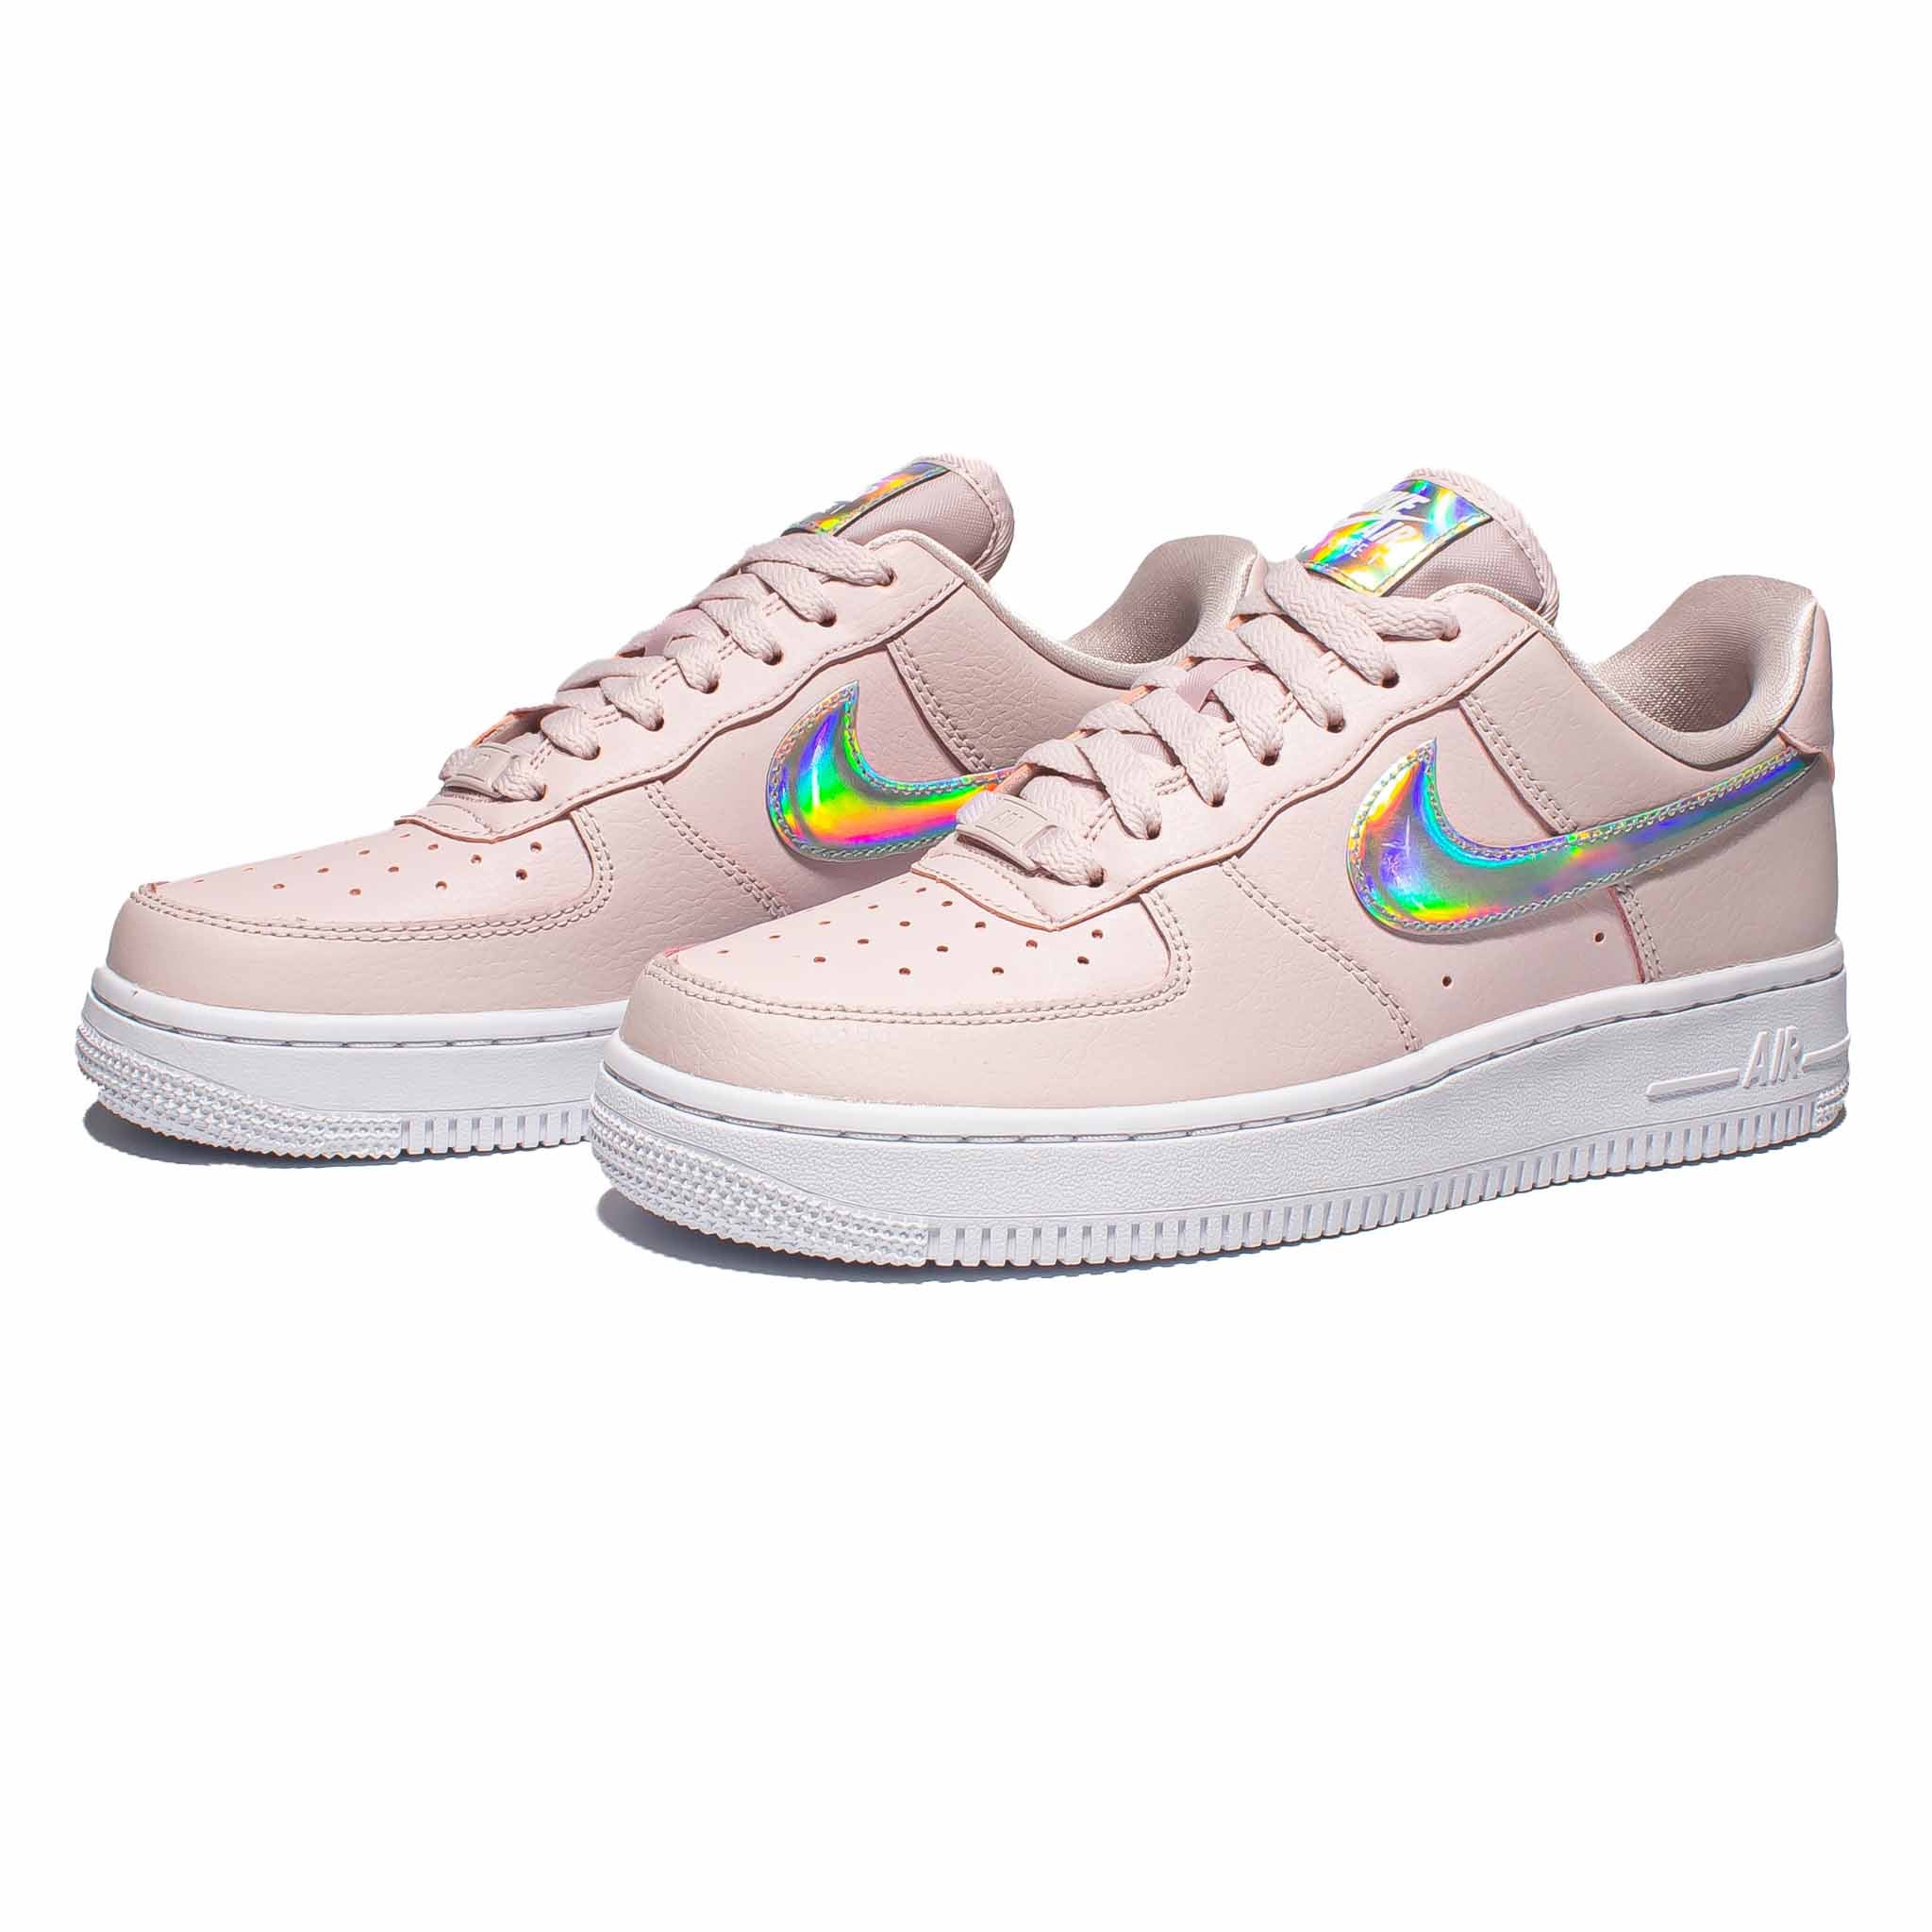 Nike Air Force 1 '07 Low 'Iridescent Swoosh' Pink